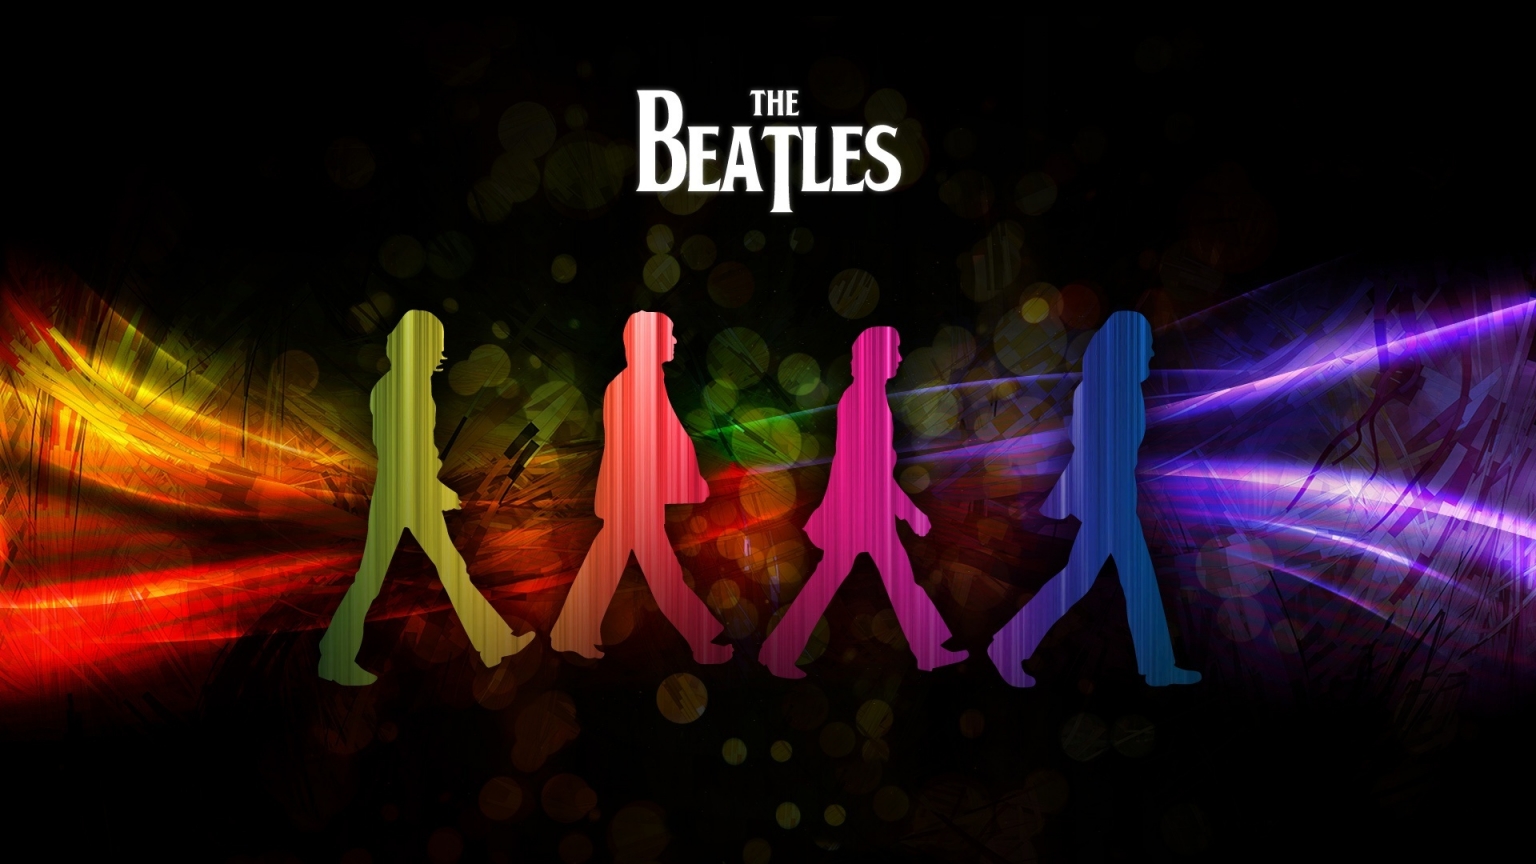 The Beatles Shadows for 1536 x 864 HDTV resolution